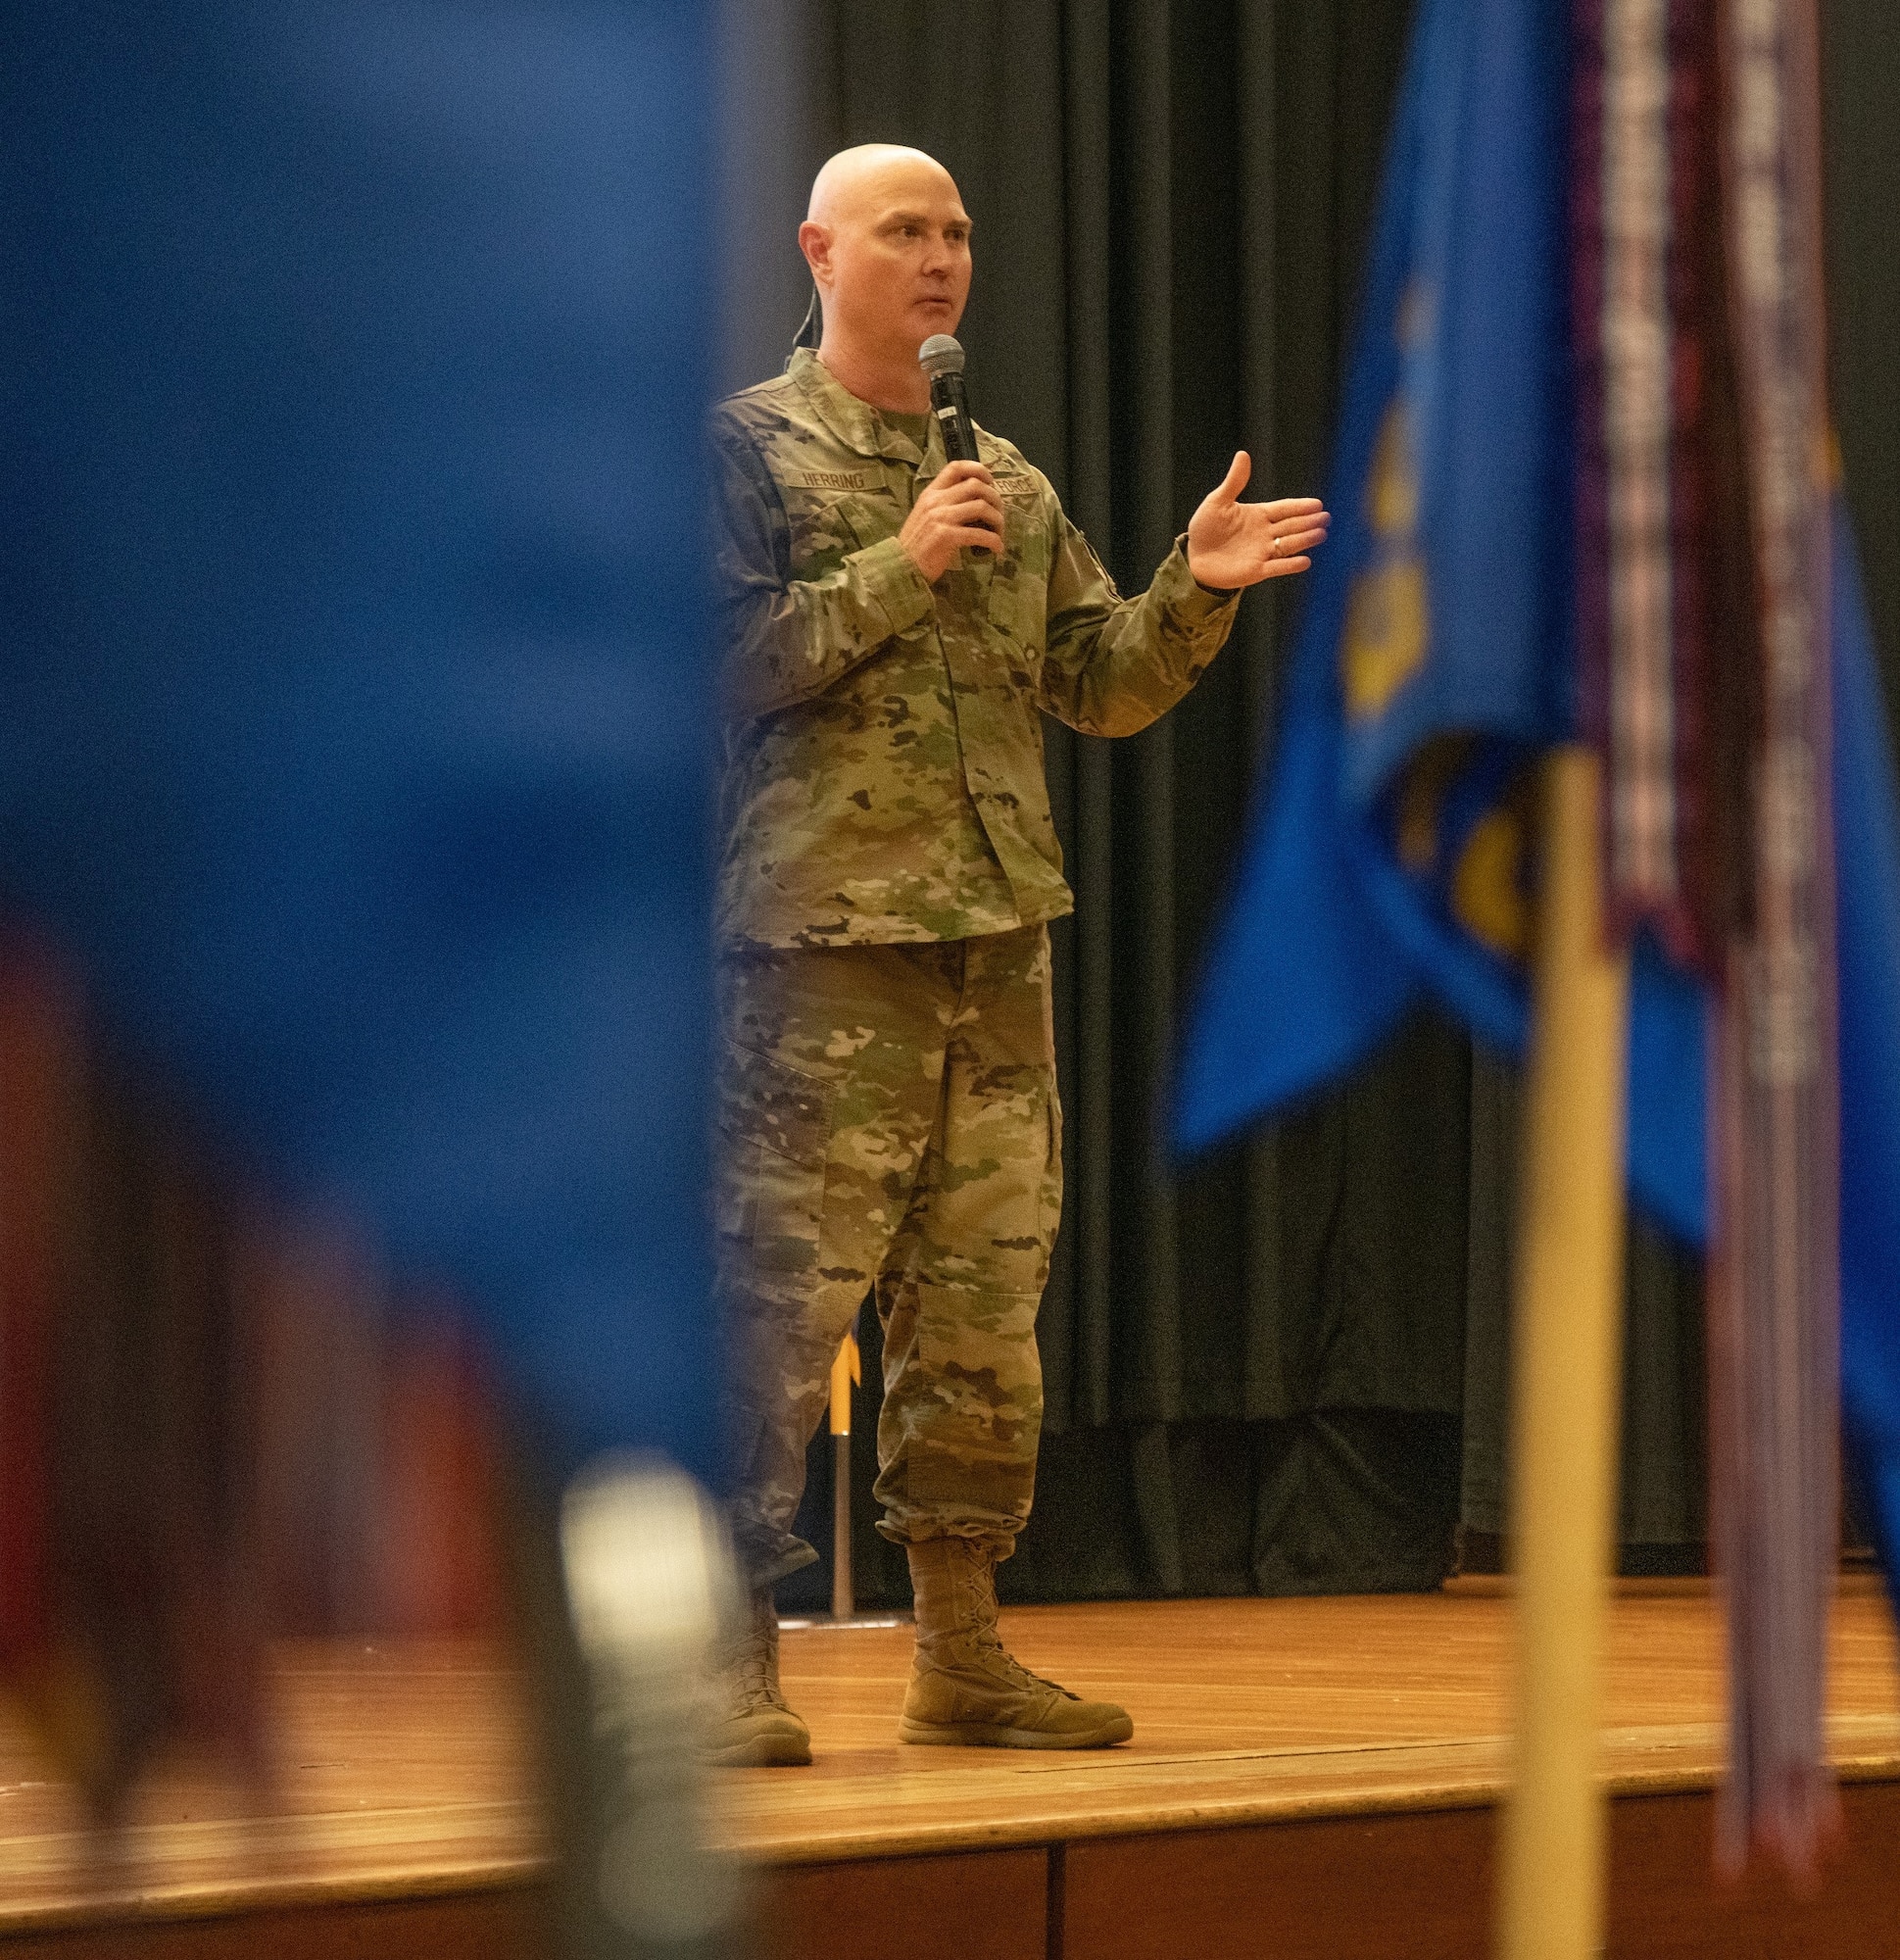 Col. Jason Herring, 621st Contingency Response Wing Commander, addresses the Airmen of the 621st CRW during a commander’s call August 16, 2023 at the base theater on JB McGuire-Dix-Lakehurst, NJ.